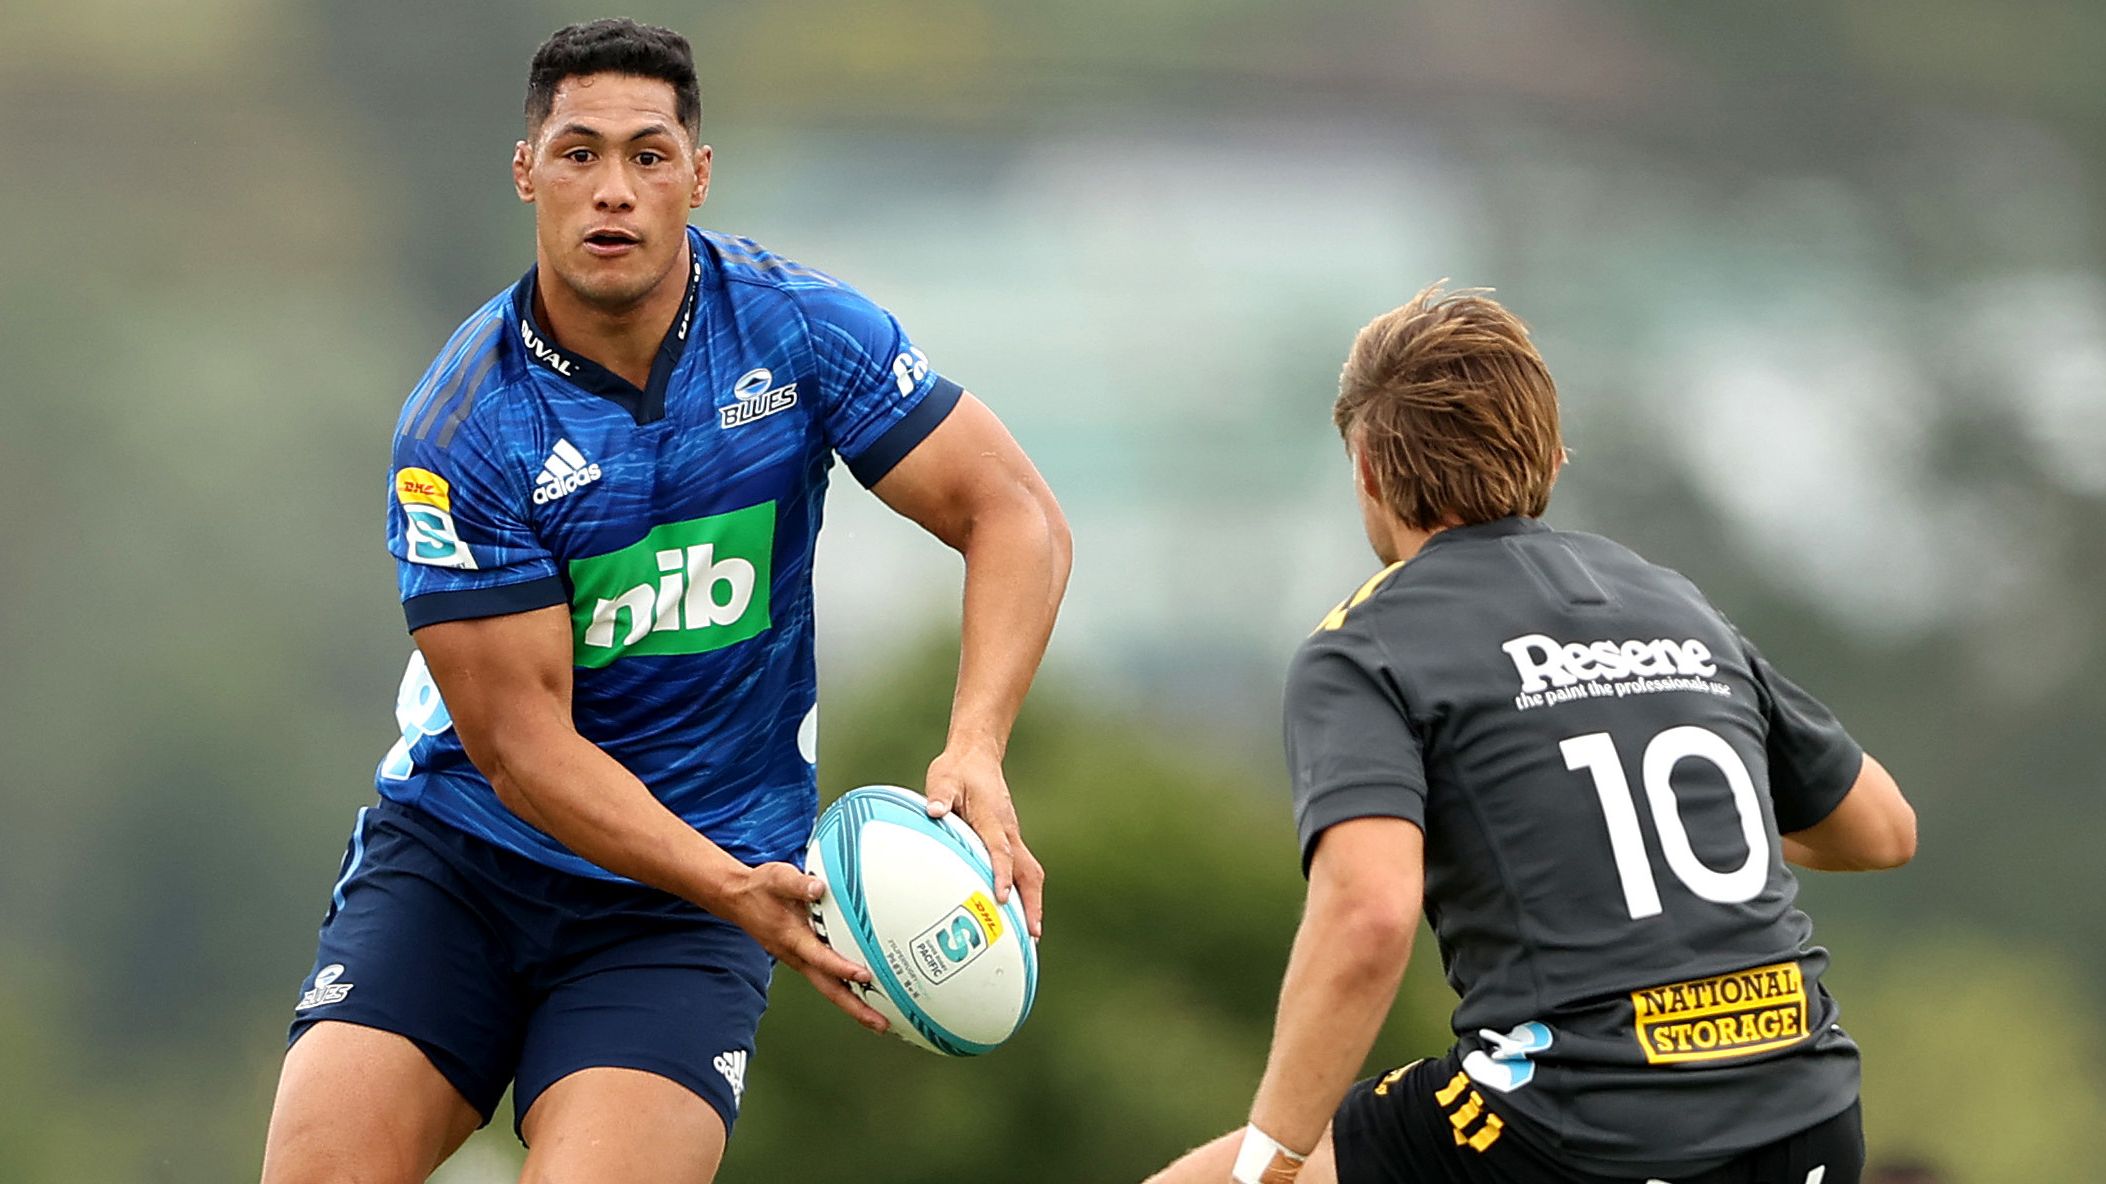 Roger Tuivasa-Sheck of the Blues passes during the Super Rugby trial match between the Blues and the Hurricanes 